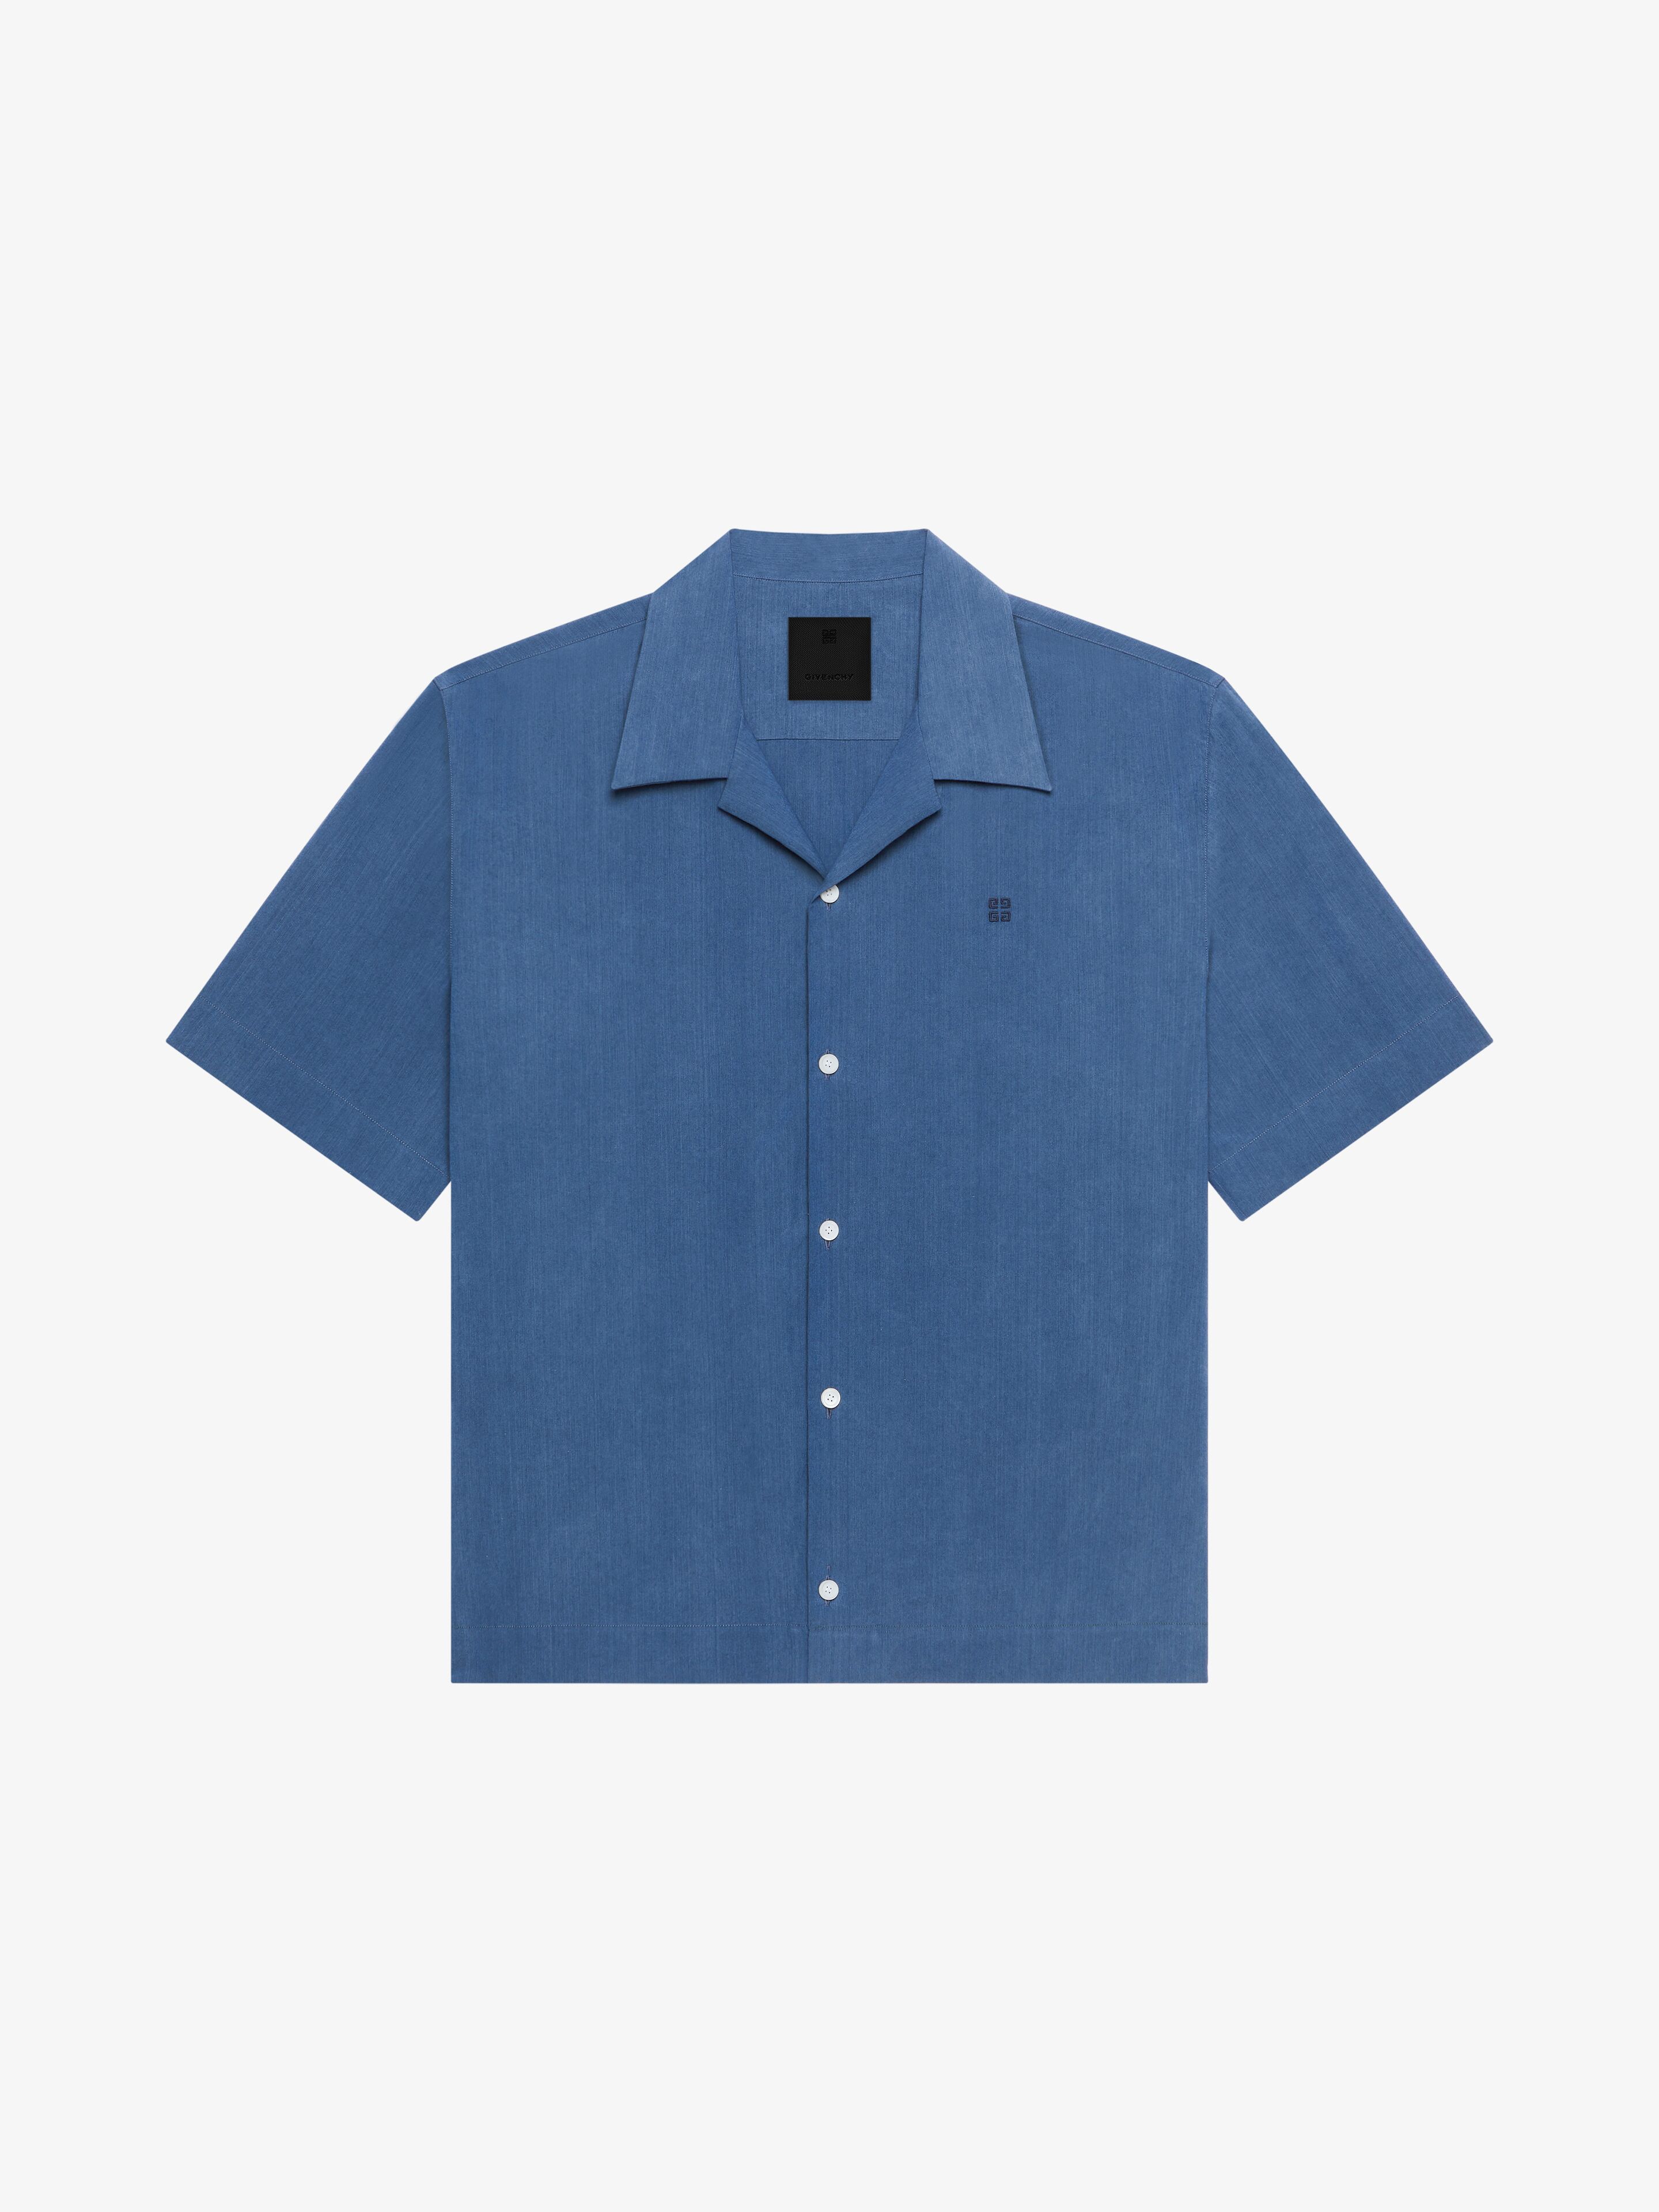 Givenchy Shirt In Ozone Washed Denim Chambray In Blue